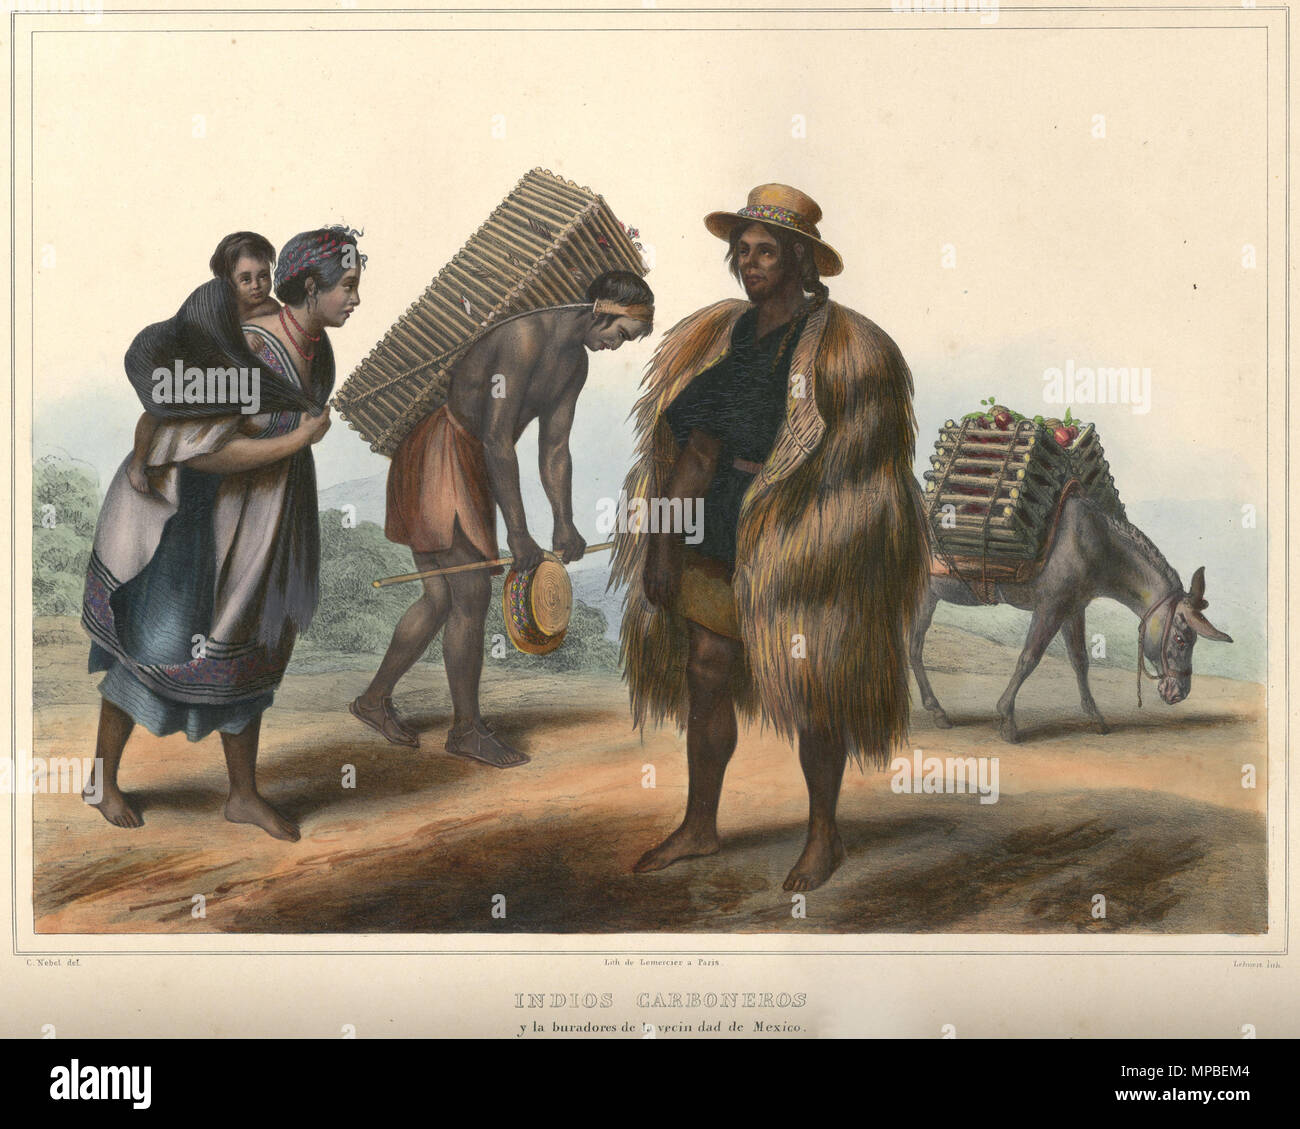 . English: Indios Carboneros, costume group. Hand-colored lithograph highlighted with gum arabic. Original size (neat lines): 39×29 cm. published 1836. Lithograph by   Pierre Frédéric Lehnert  (1811–)    Alternative names Pierre Frédéric Lehnert, F. Lehnert  Description French lithographer  Date of birth 31 January 1811  Location of birth Paris  Work location France  Authority control  : Q26248624 VIAF: 91878749 ISNI: 0000 0000 6549 986X LCCN: no2011158631 NLA: 35244171 SUDOC: 170529487 WorldCat    after a drawing by   Carl Nebel  (1805–1855)    Alternative names Carlos Nebel  Description Germ Stock Photo